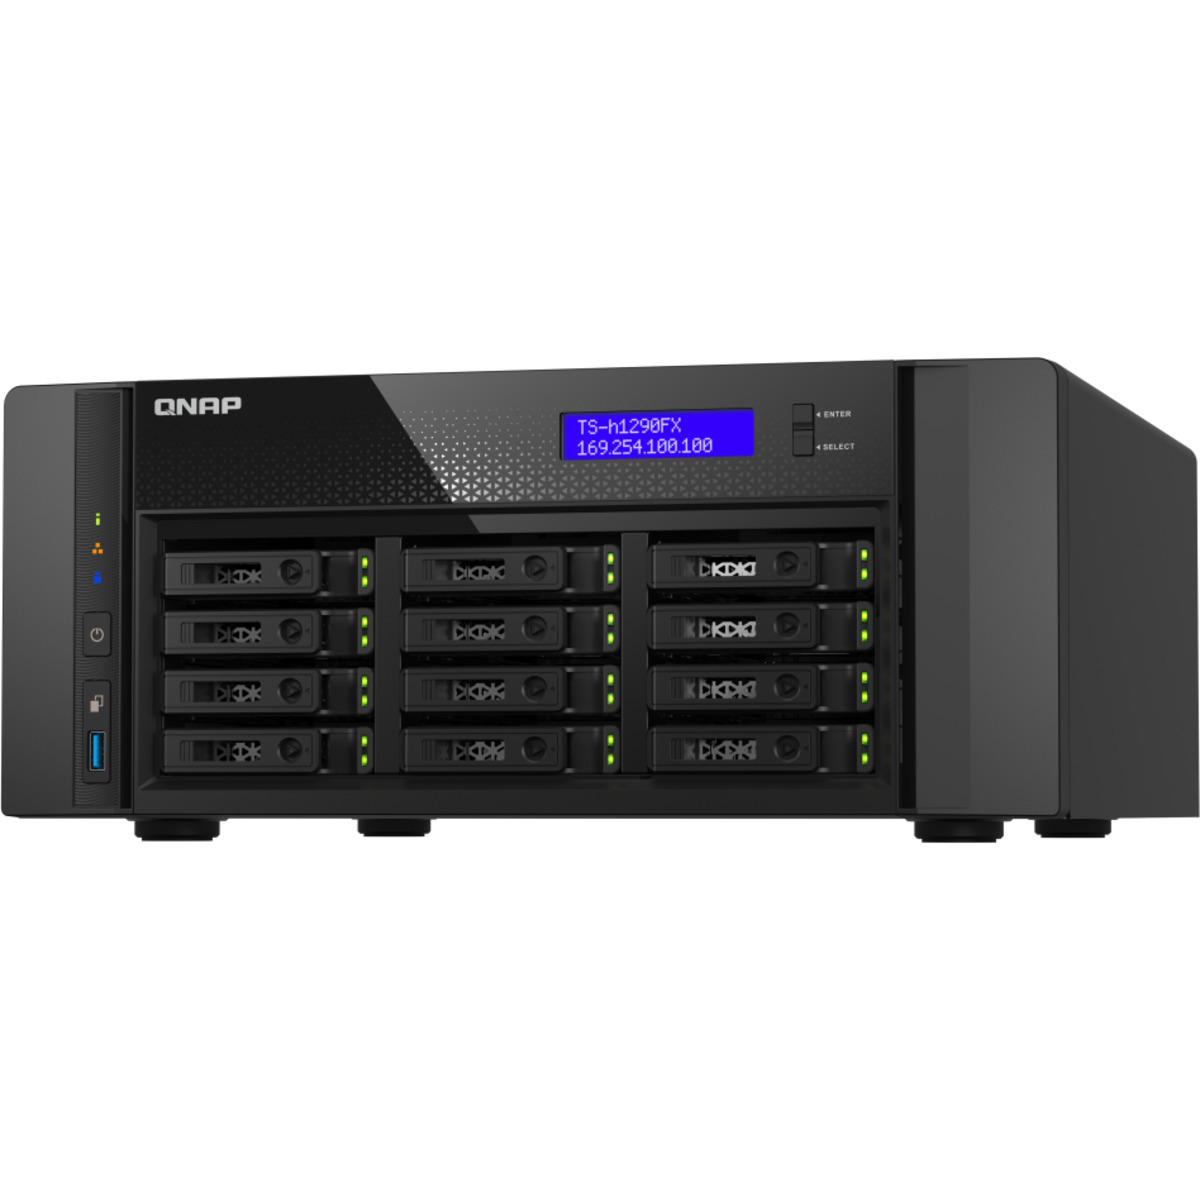 QNAP TS-h1290FX QuTS 7302P hero Edition 20tb 12-Bay Desktop Large Business / Enterprise NAS - Network Attached Storage Device 10x2tb Western Digital Red SA500 WDS200T1R0A 2.5 560/530MB/s SATA 6Gb/s SSD NAS Class Drives Installed - Burn-In Tested TS-h1290FX QuTS 7302P hero Edition